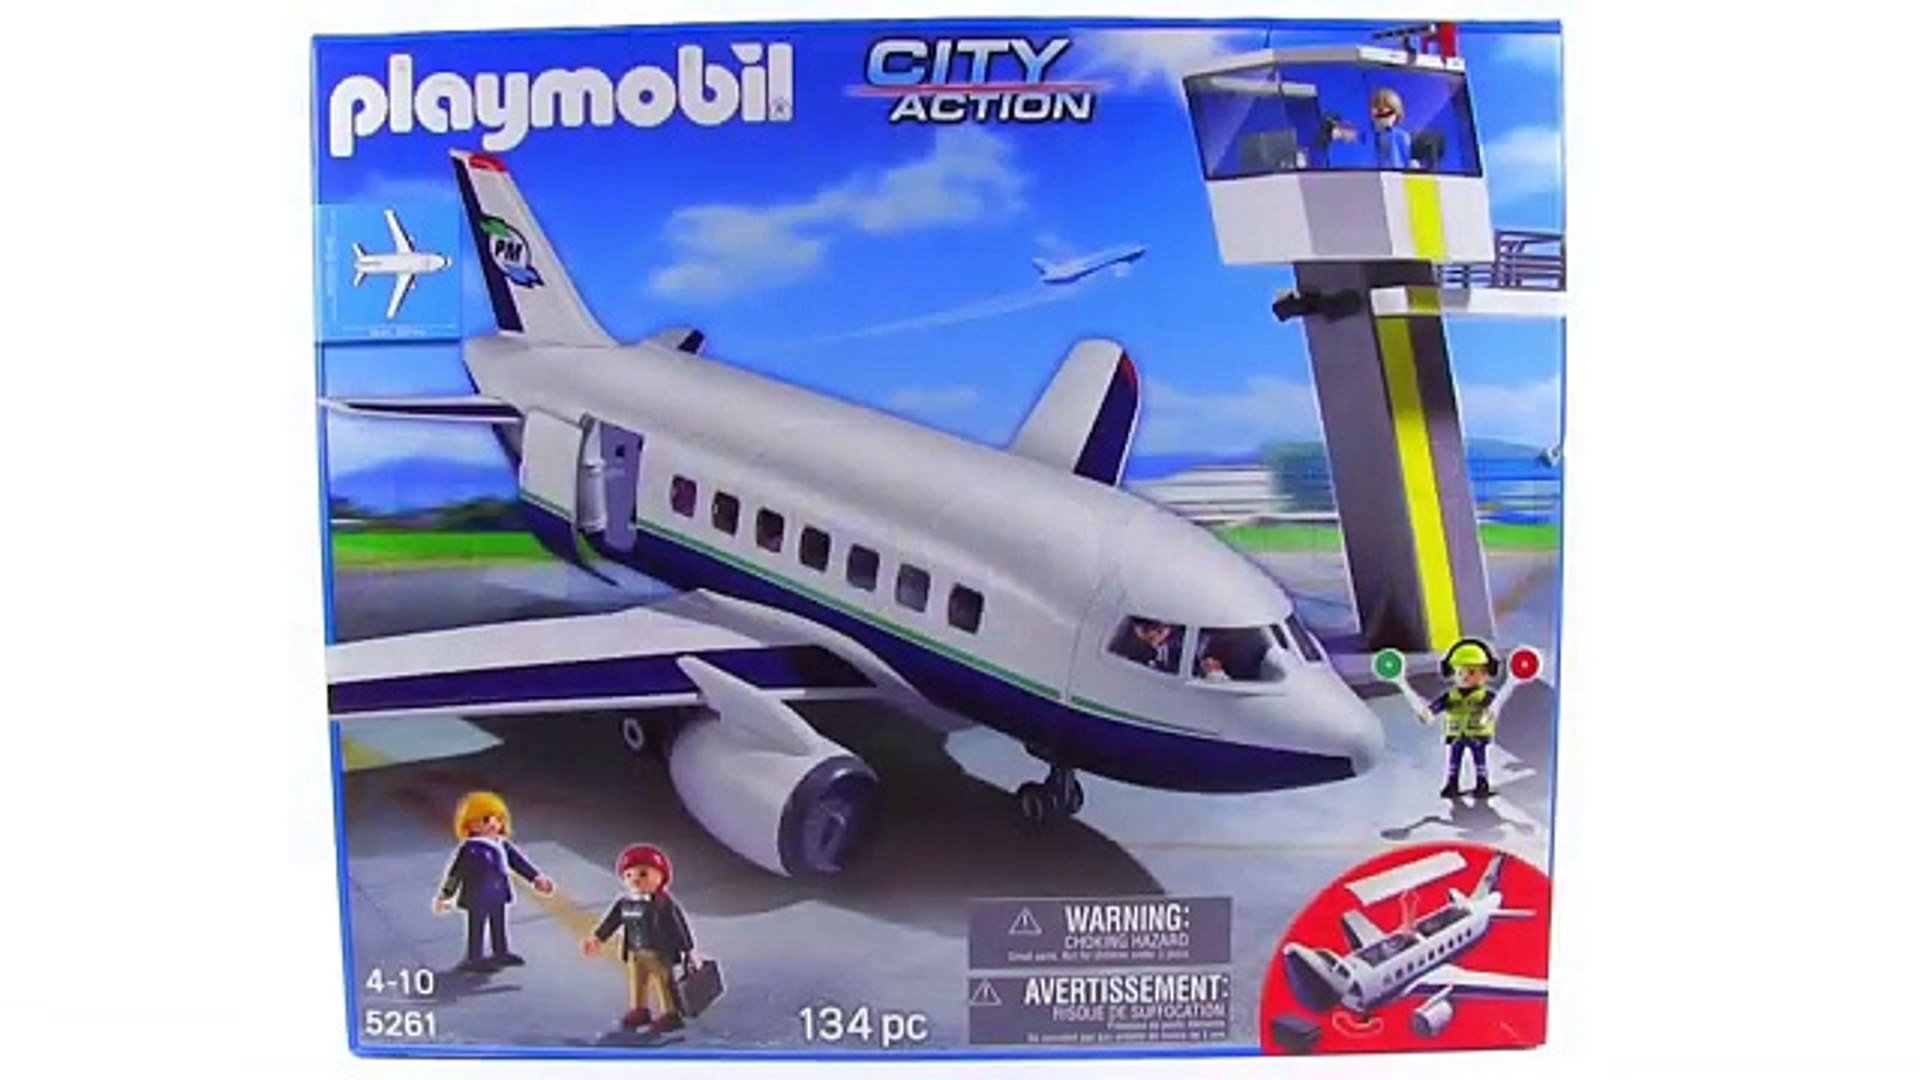 Playmobil City Action Cargo & Passenger Aircraft review! set 5261 - video  Dailymotion